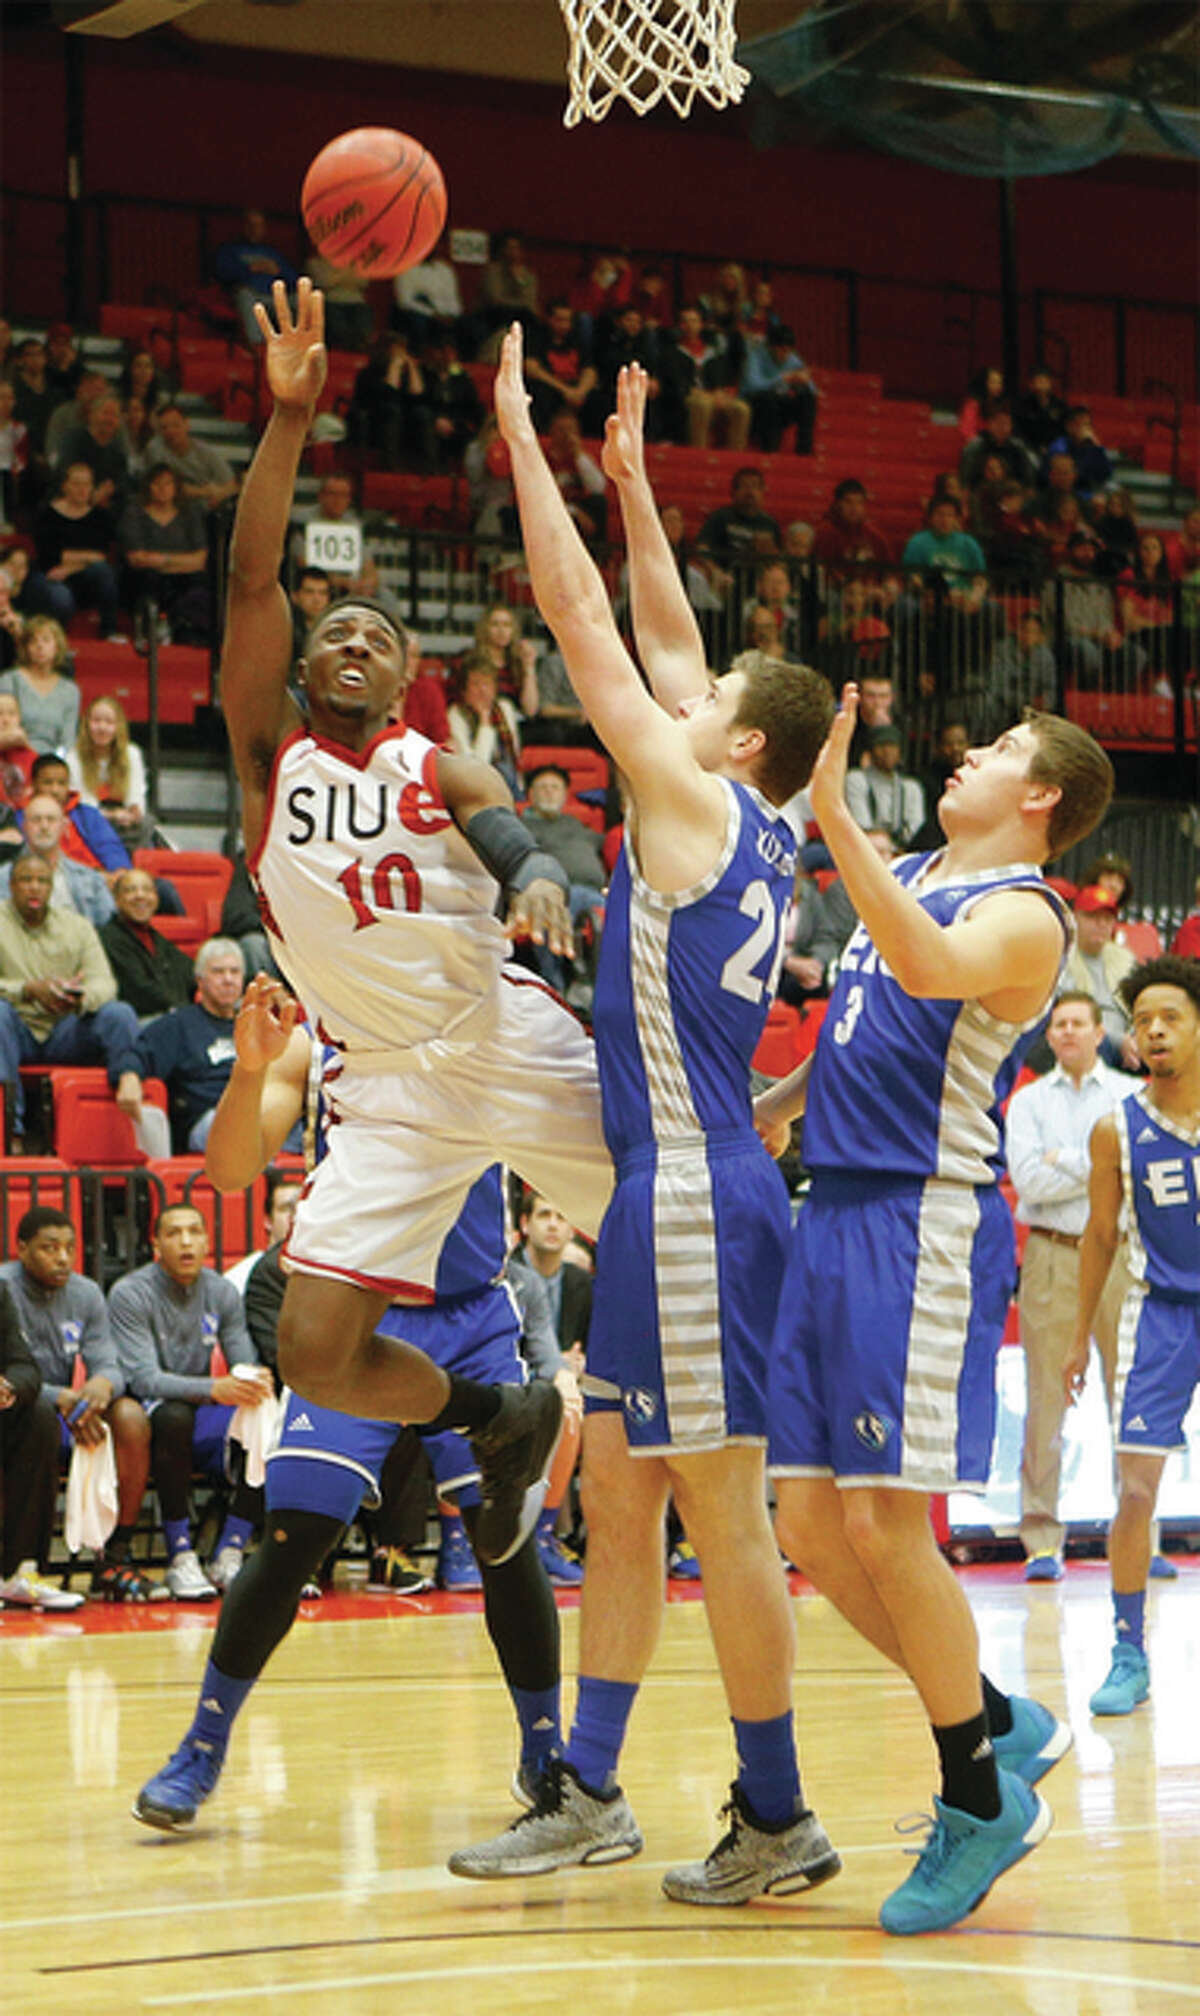 SIUE’s Carlos Anderson (10) puts up a shot in traffic against Eastern Illinois on Saturday in Edwardsville.